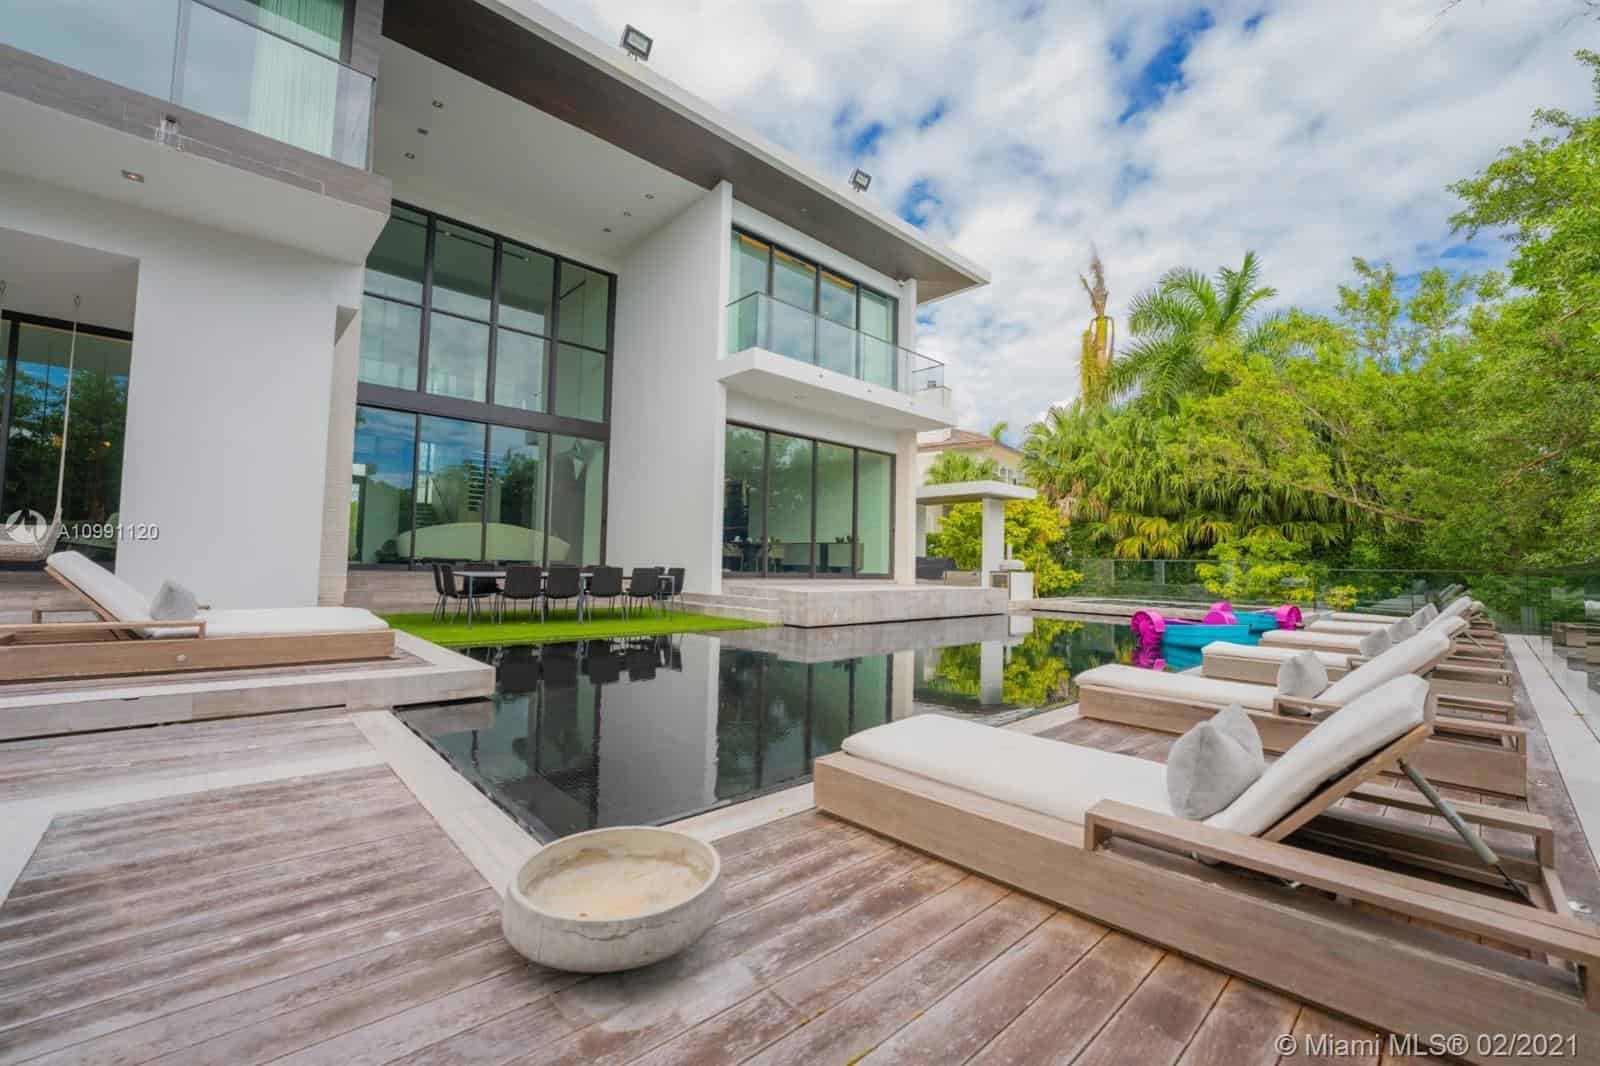 Ultra-Luxury Homes for Sale in Coral Gables: 132 Paloma Dr, Coral Gables